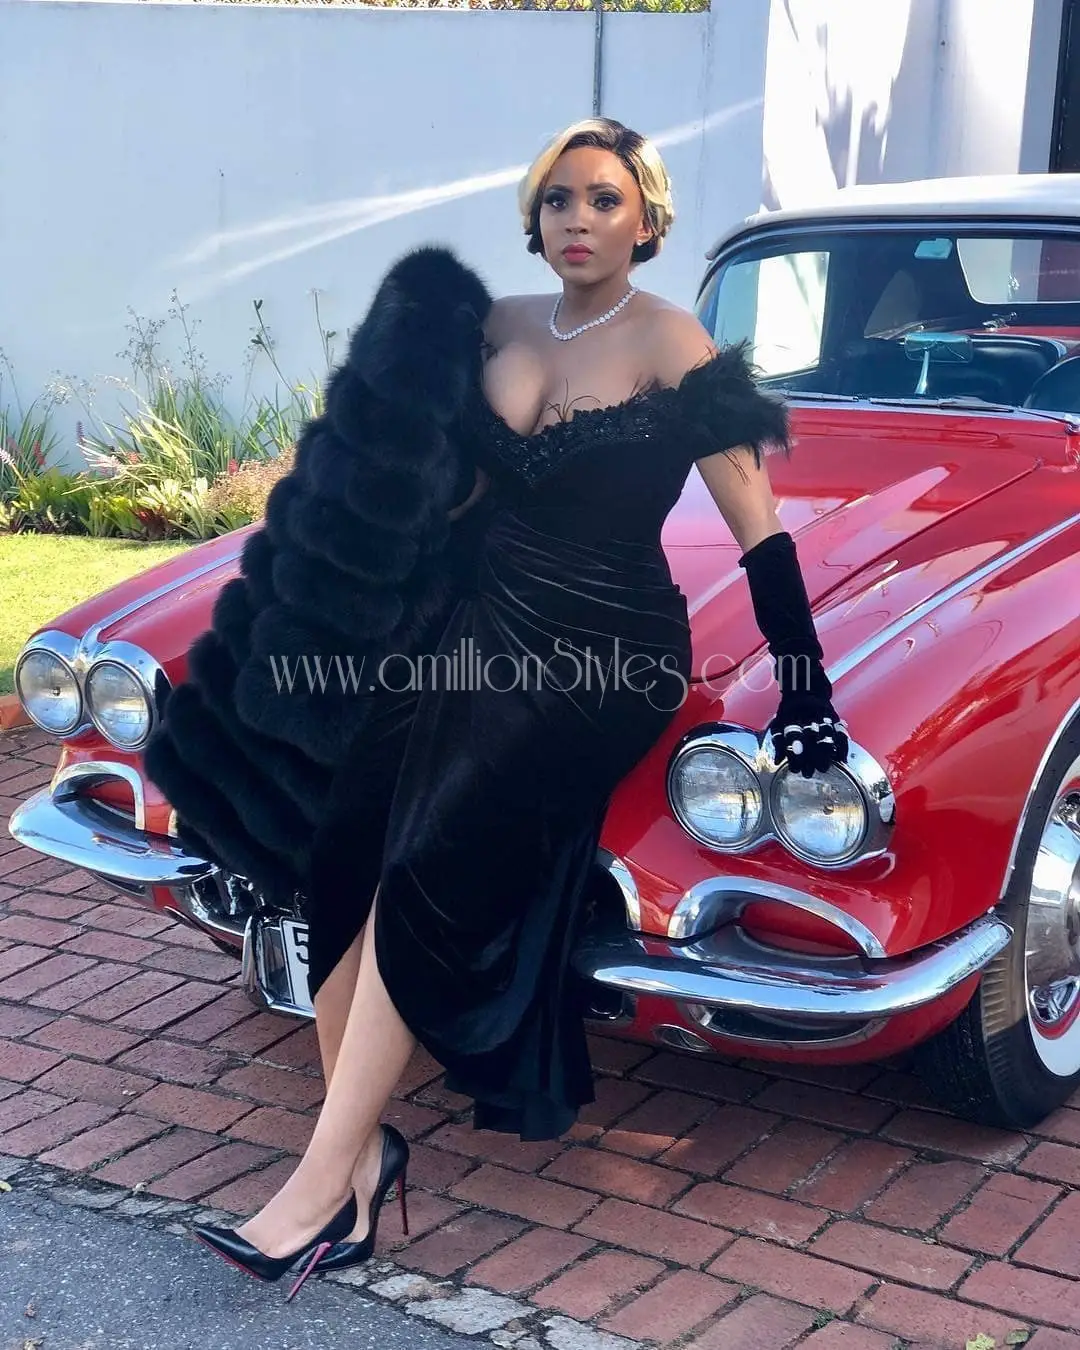 So Lit! Gorgeous Display Of Style At The 2018 Durban July Event In South Africa!